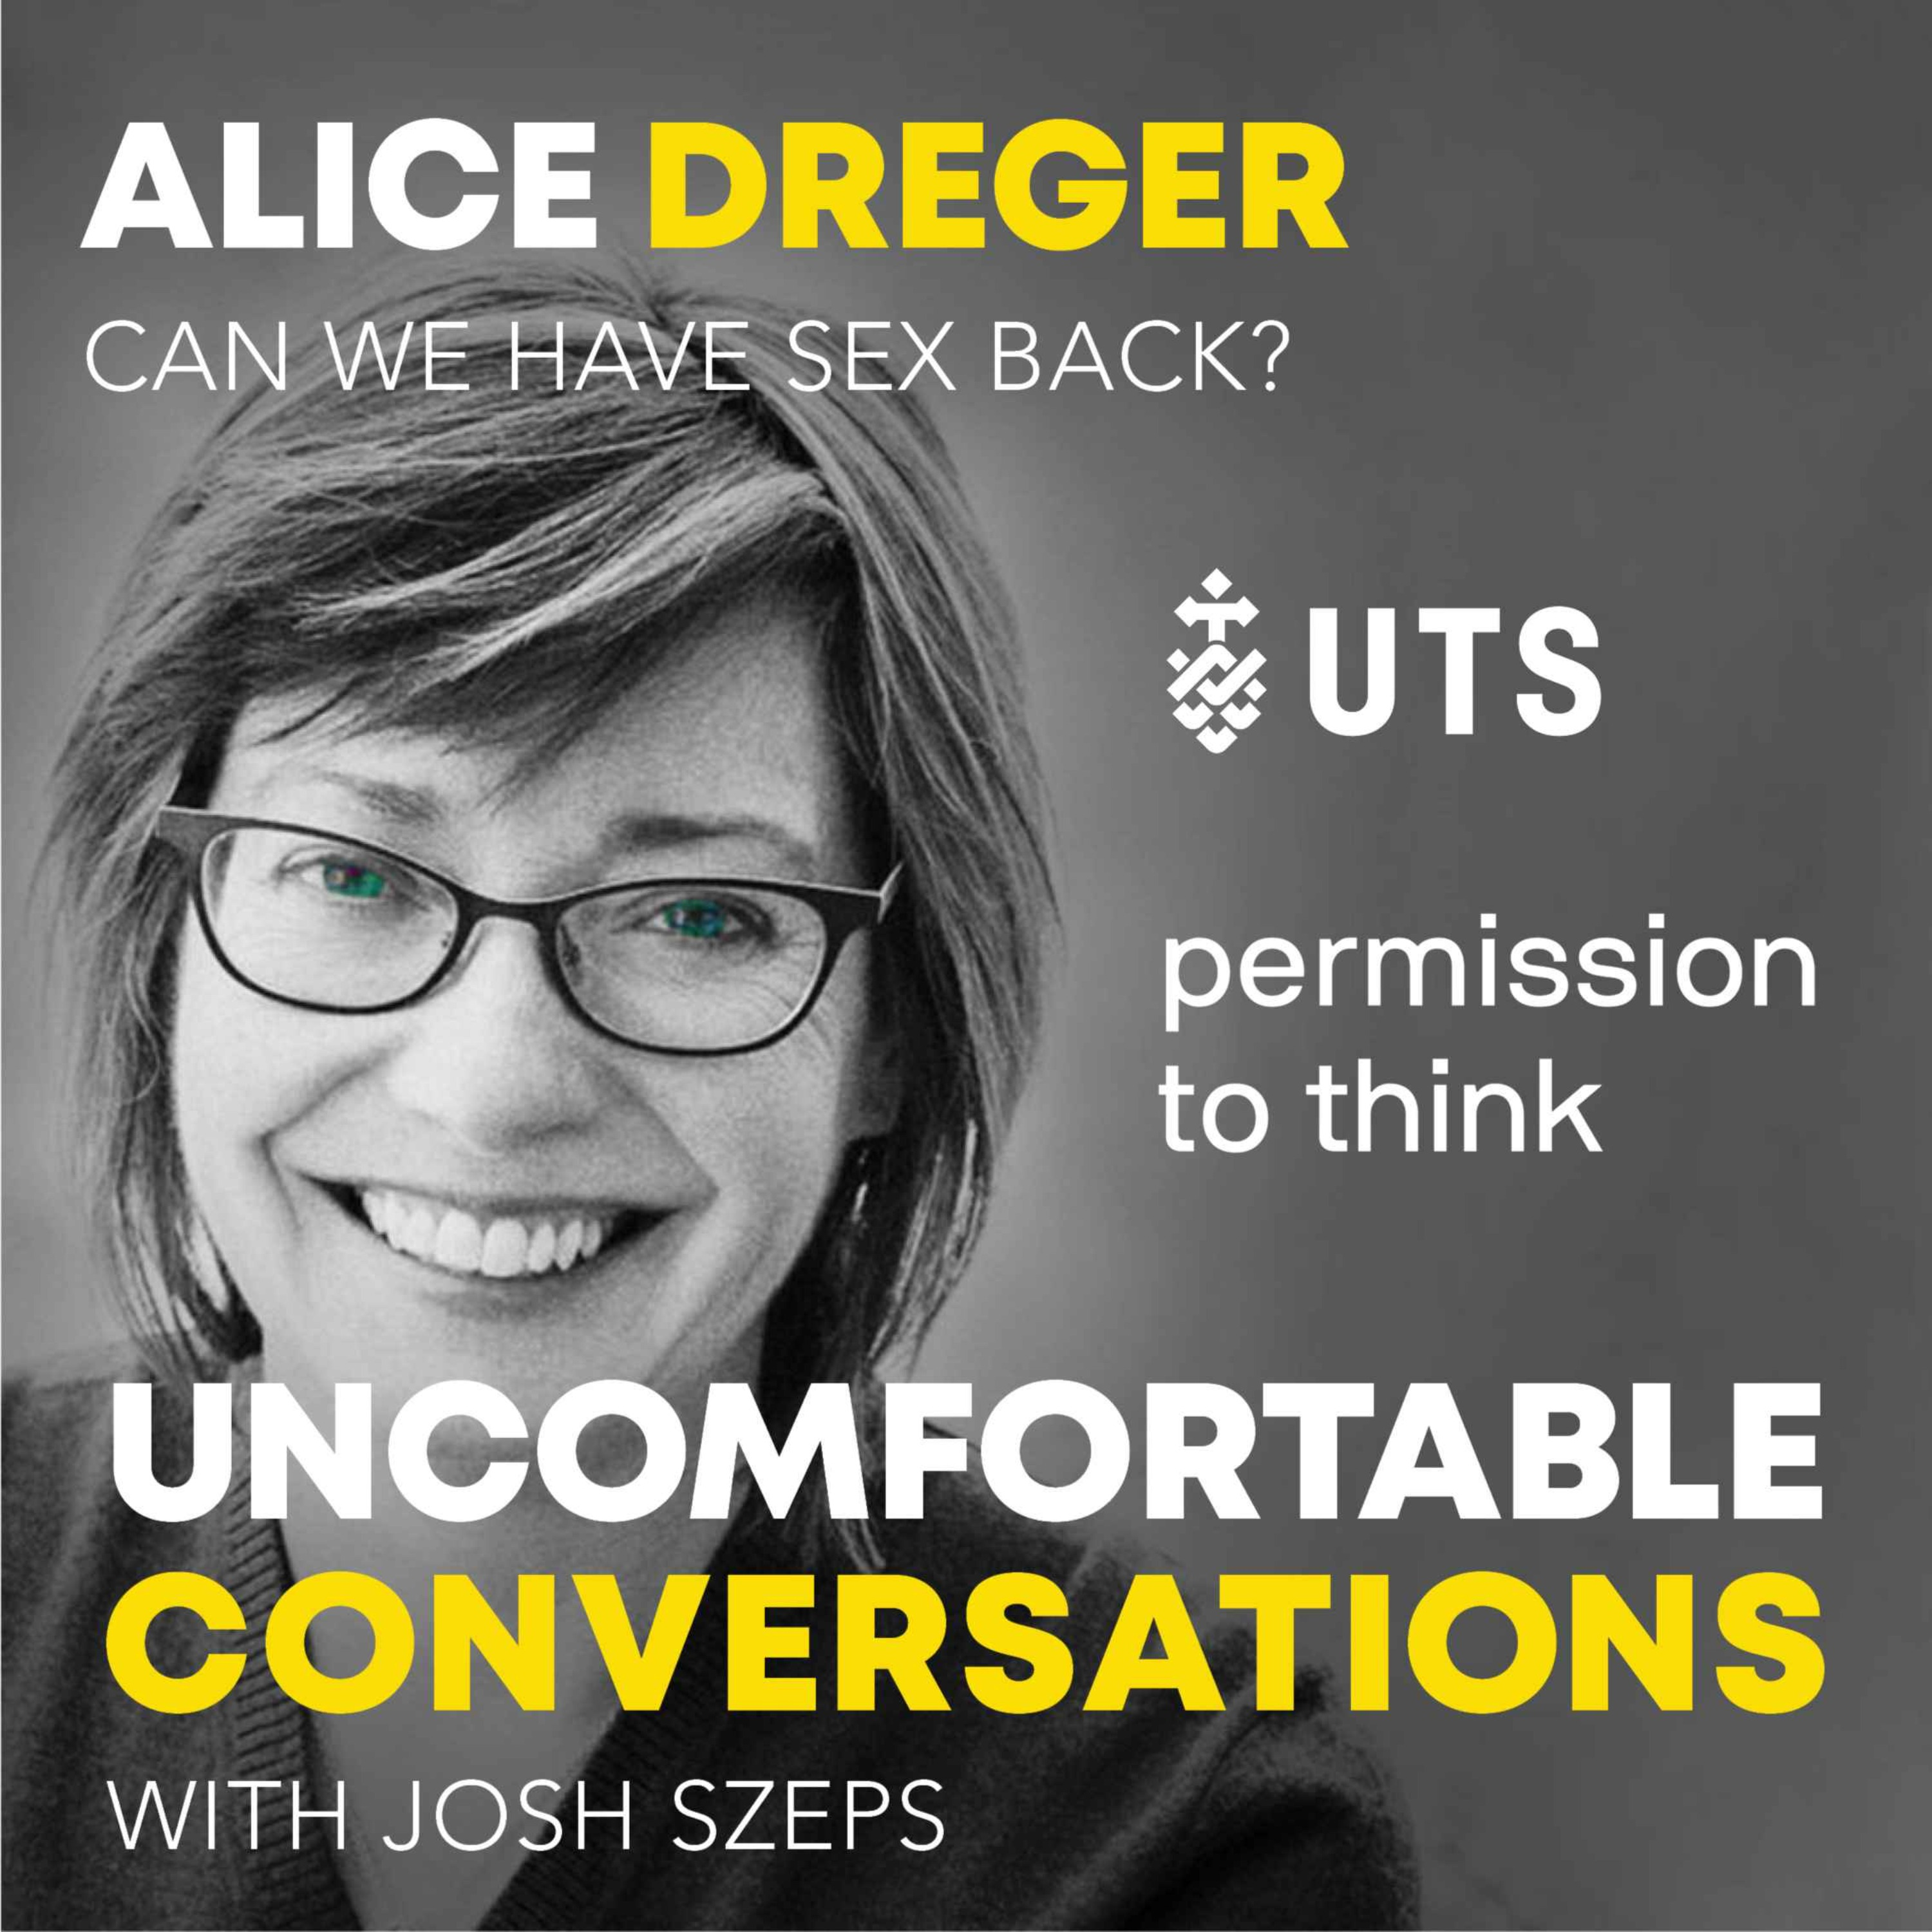 "Can We Have Sex Back?" with Alice Dreger